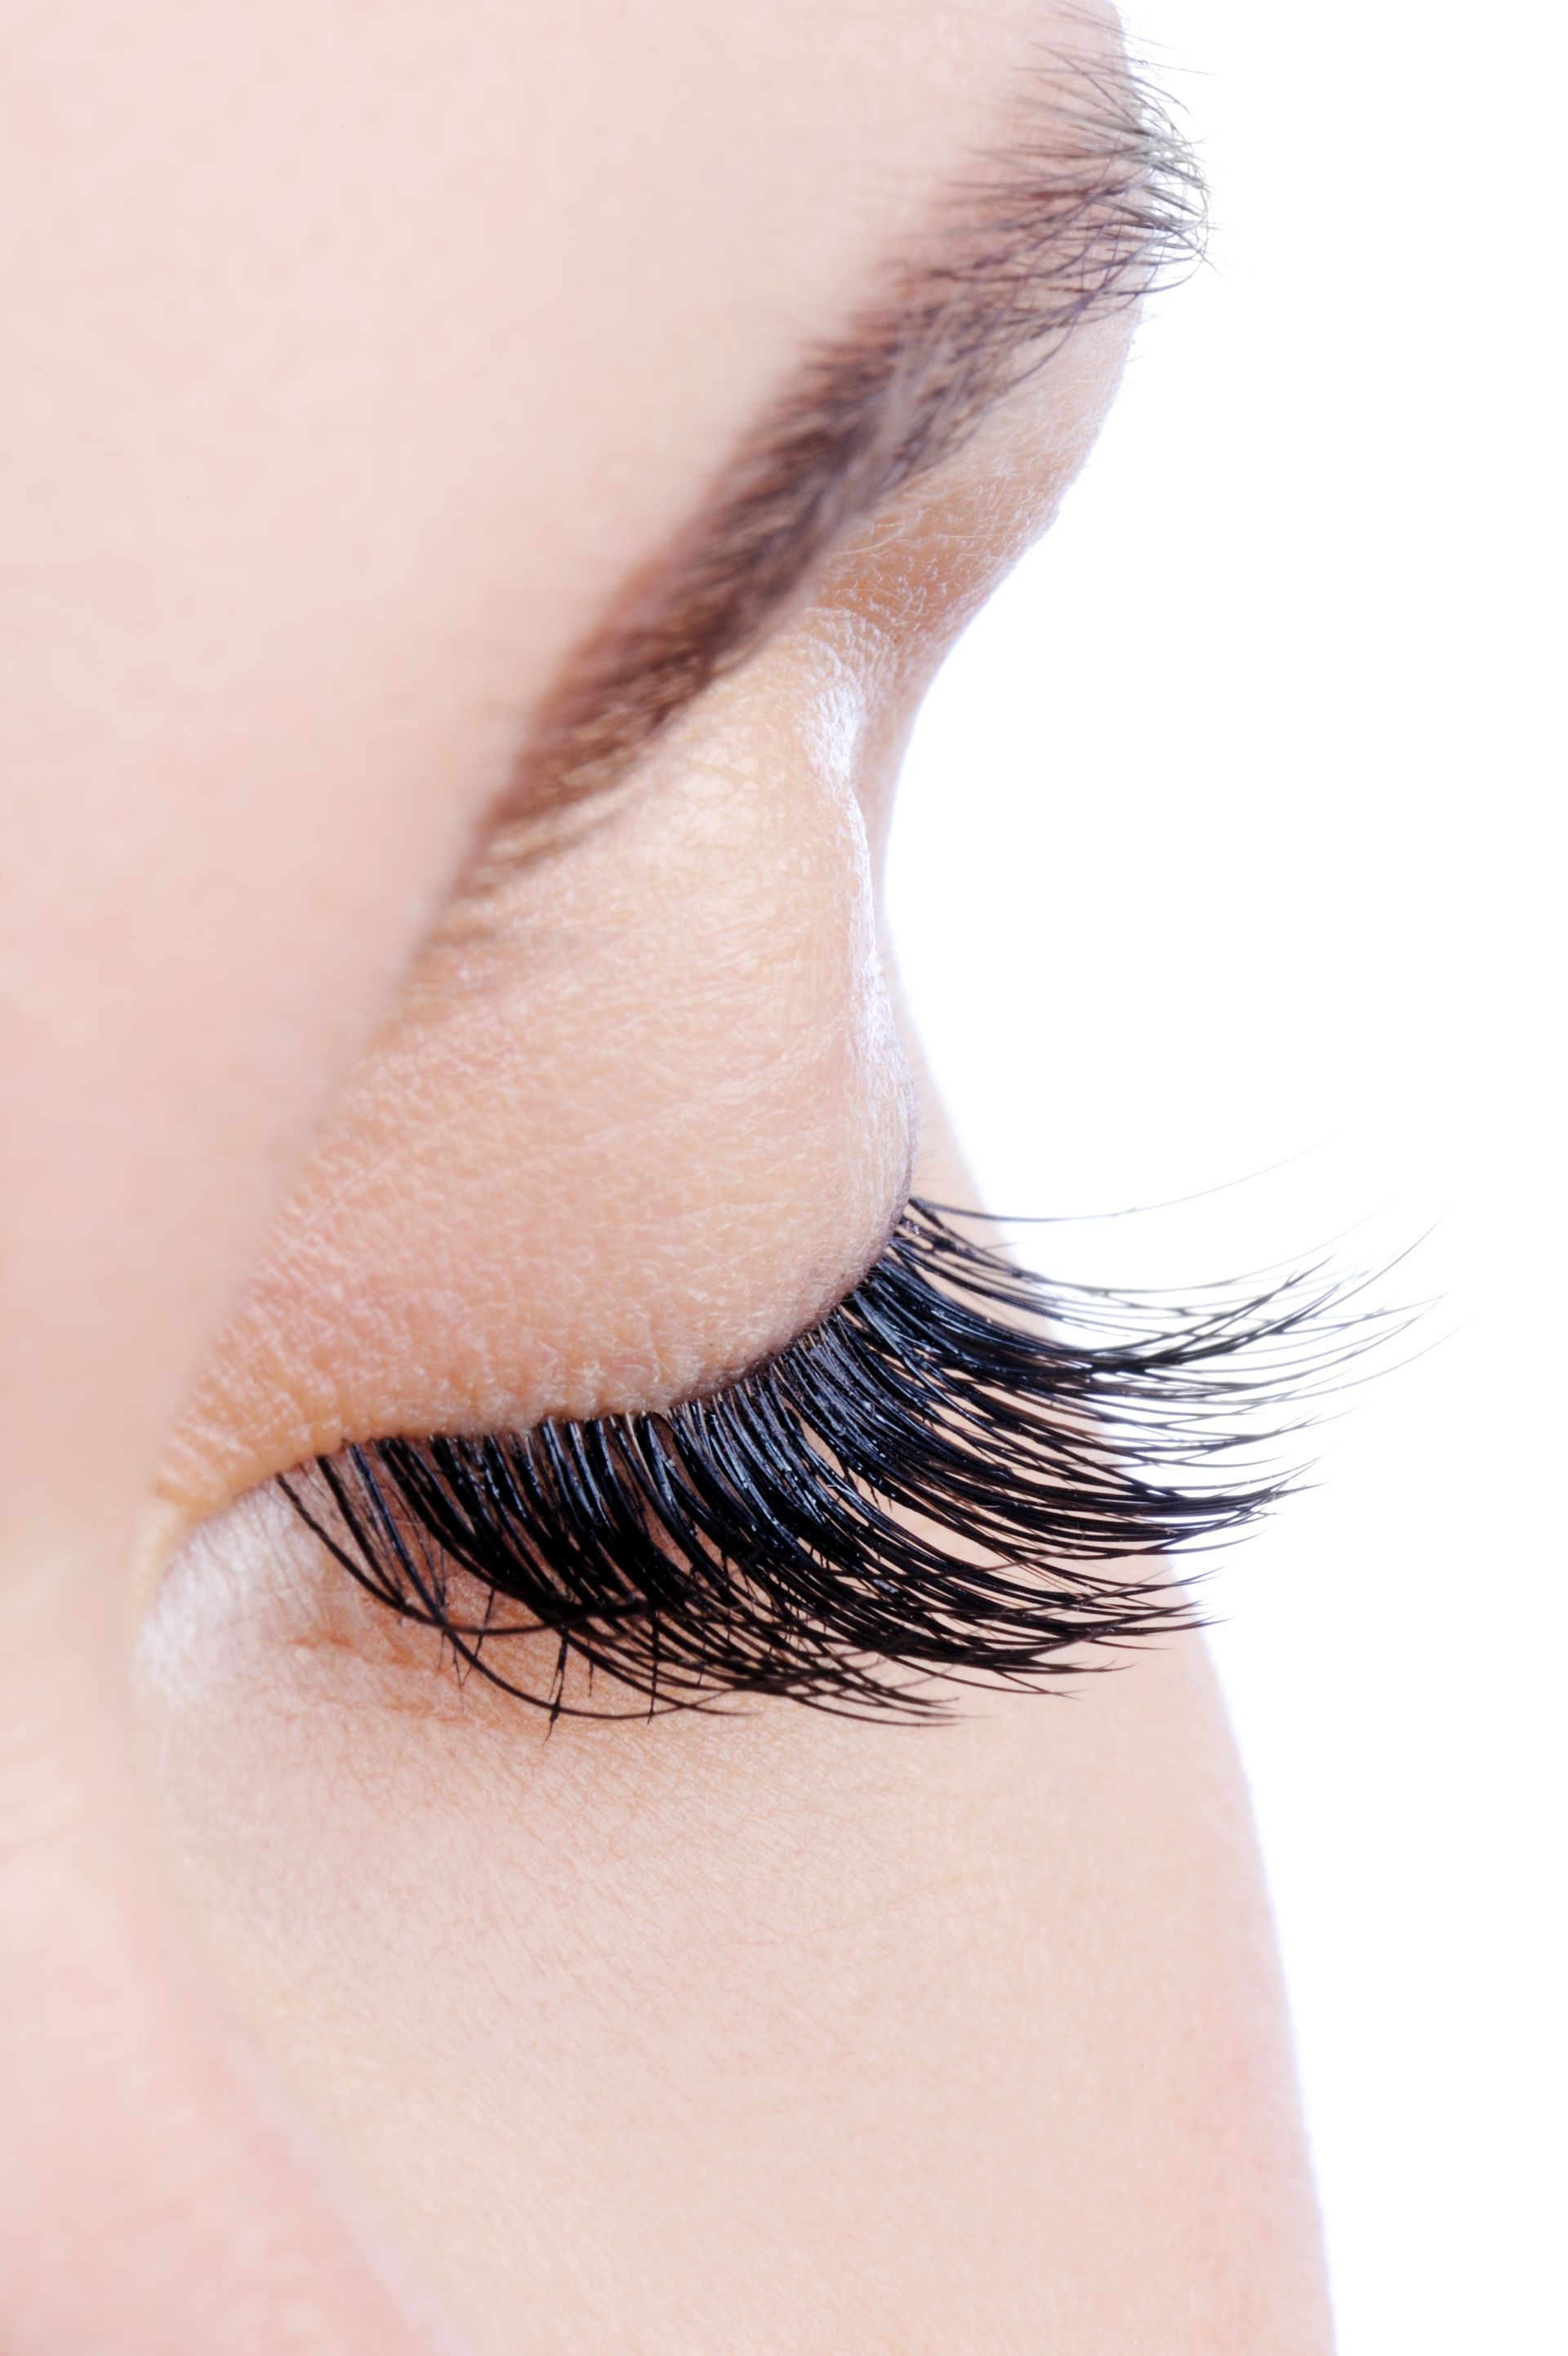 a close up of a woman 's eye with long eyelashes .